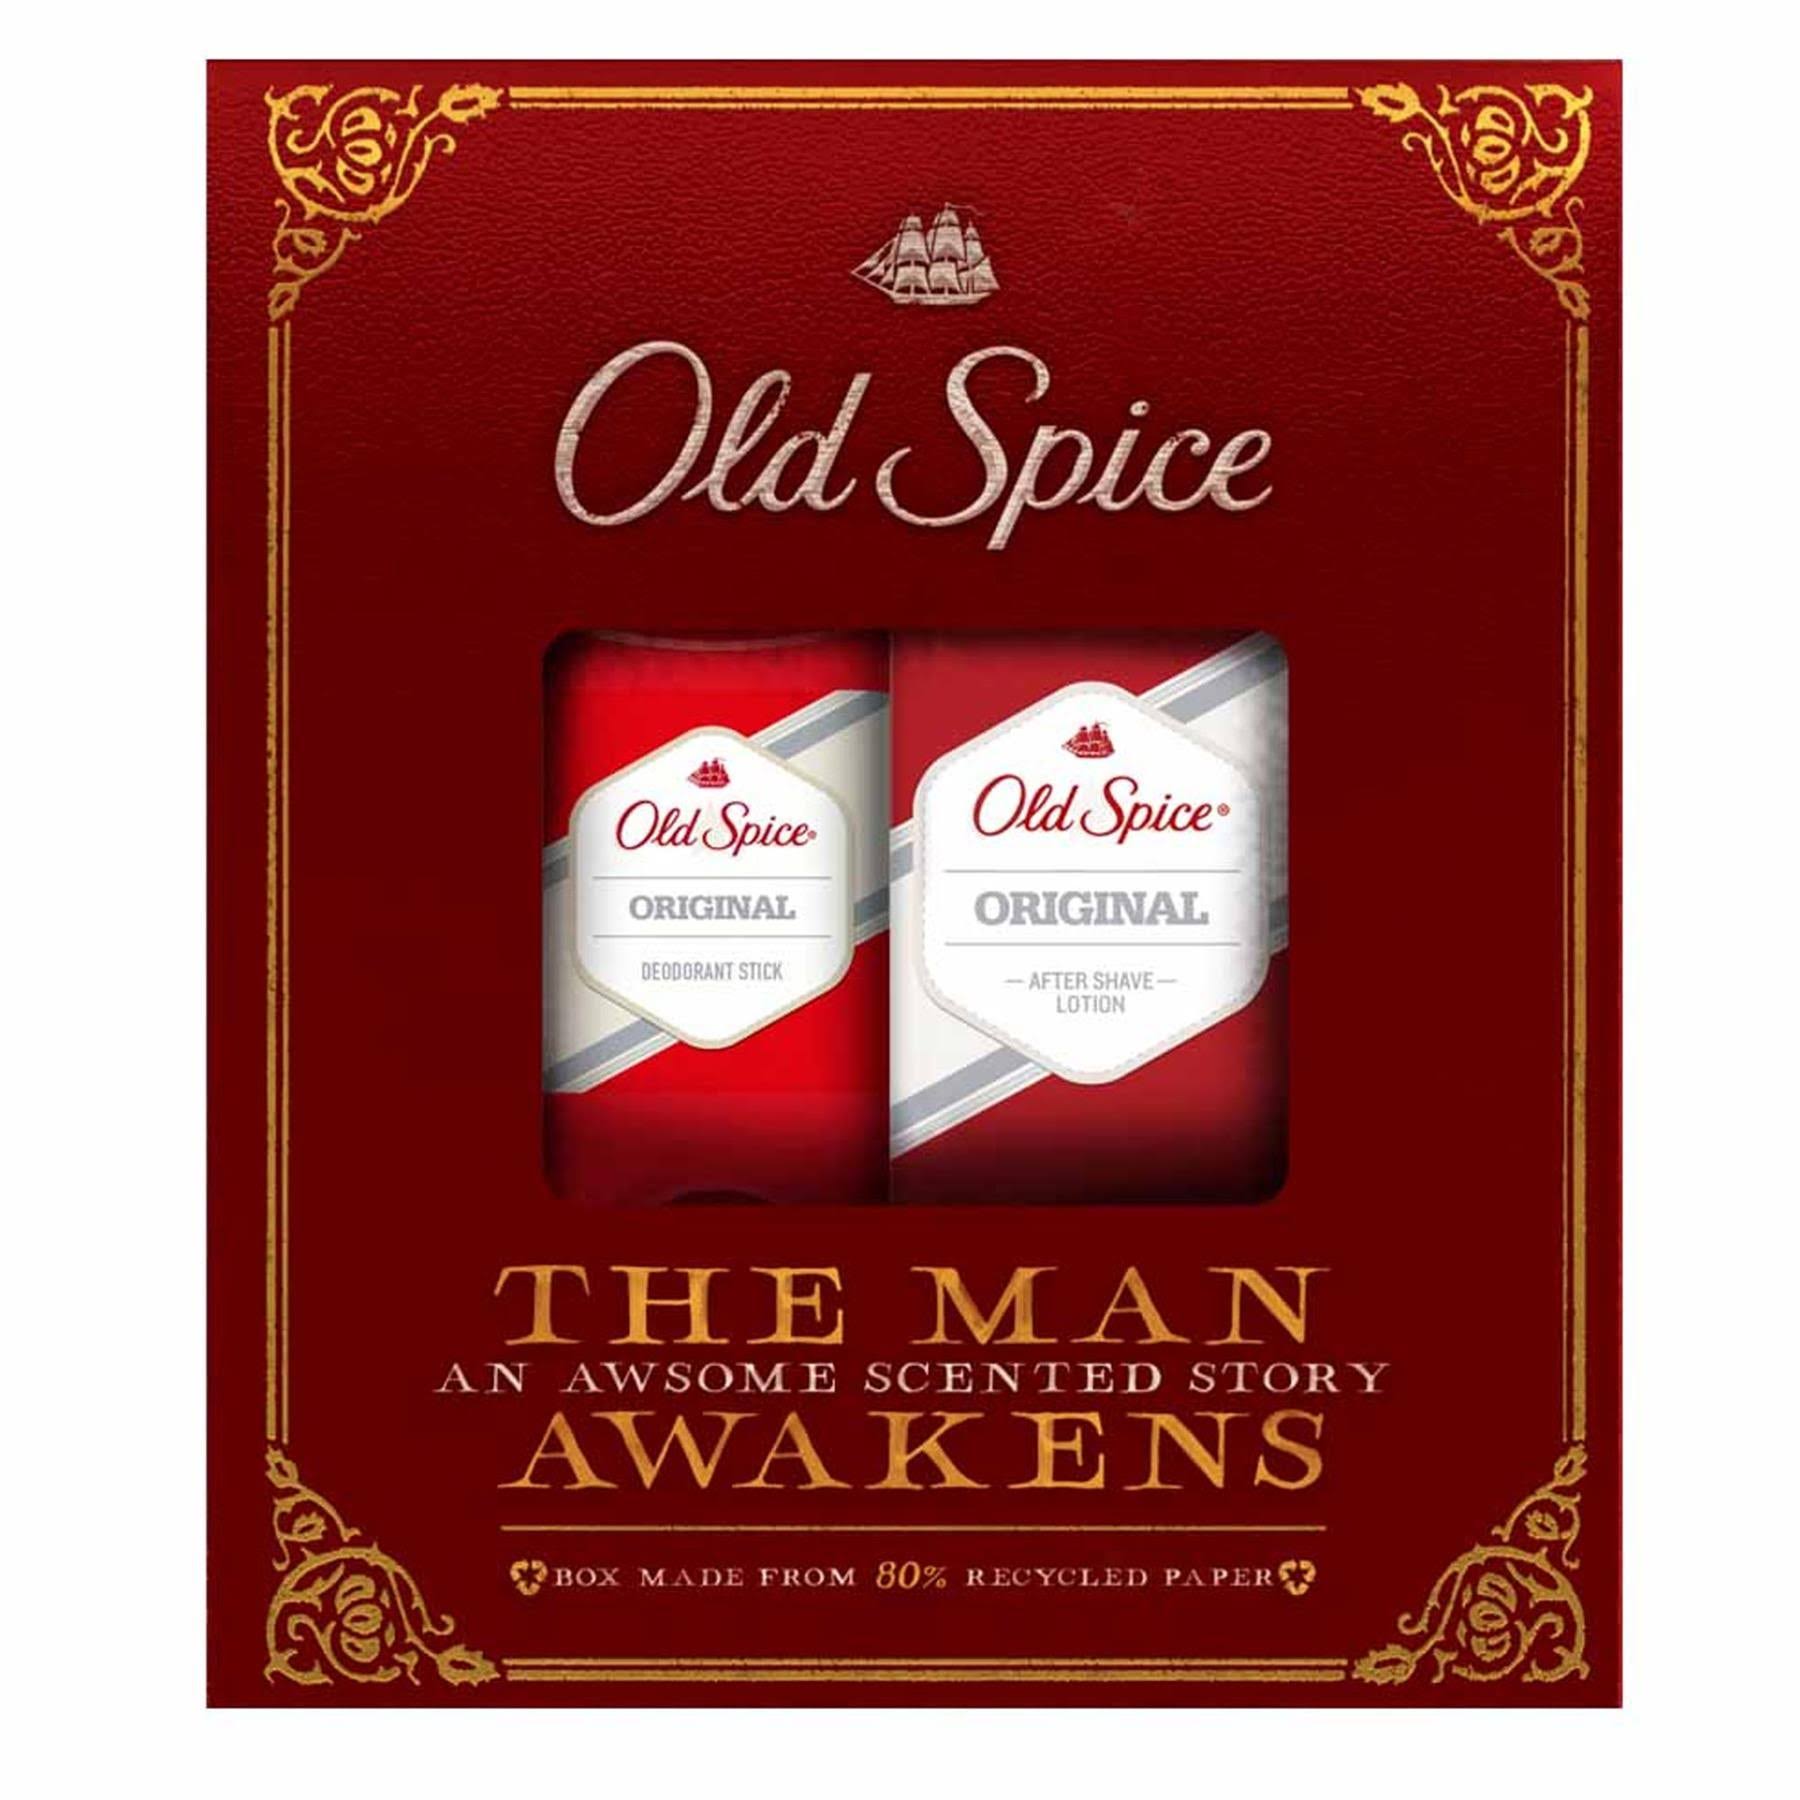 Old Spice Original Vintage Christmas Gift Set Deodorant Stick and After Shave Lotion